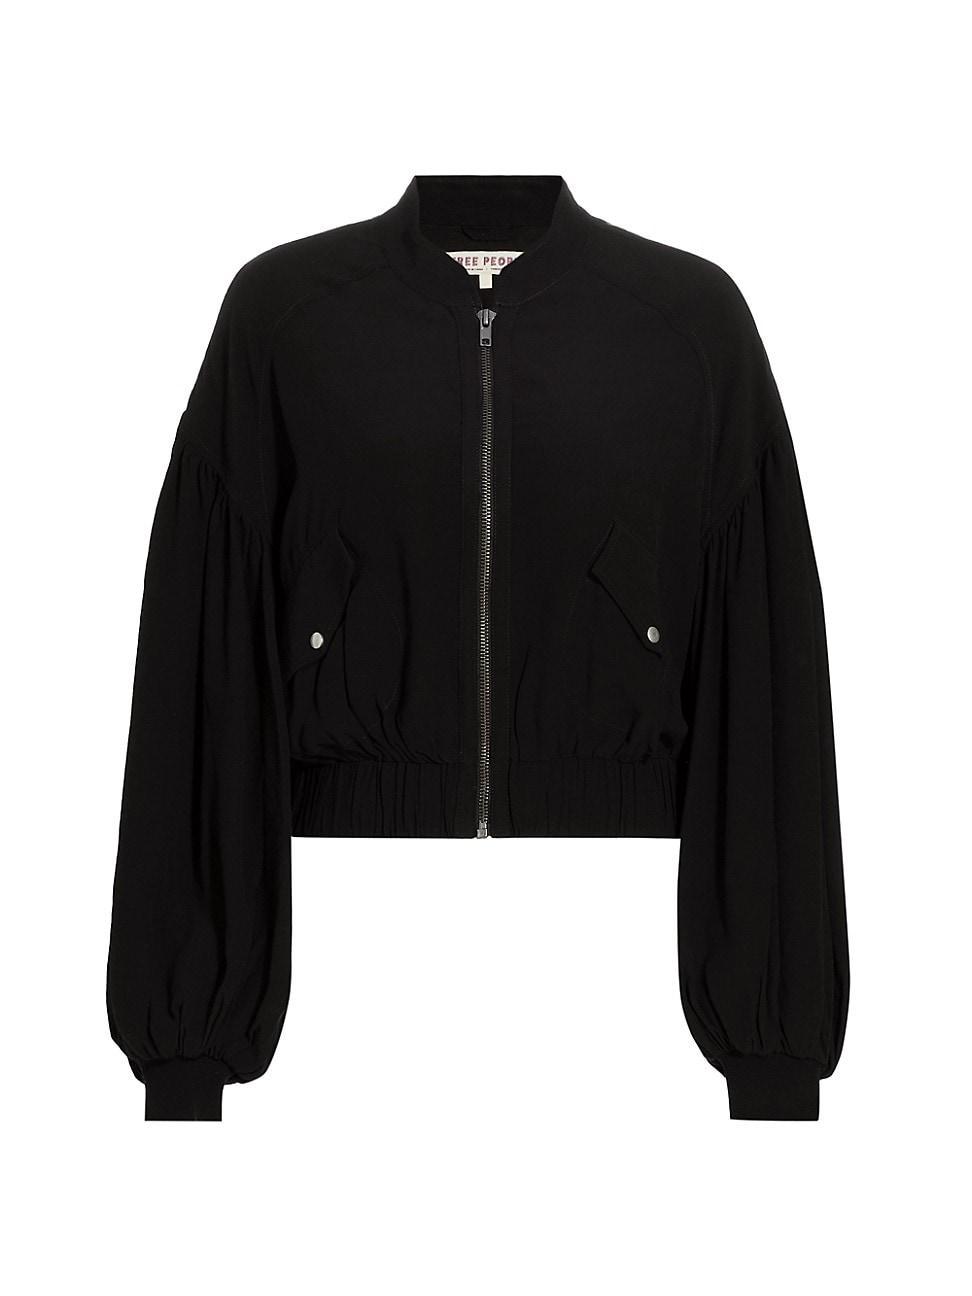 Free People On Pointe Bomber Jacket in Black | Lyst